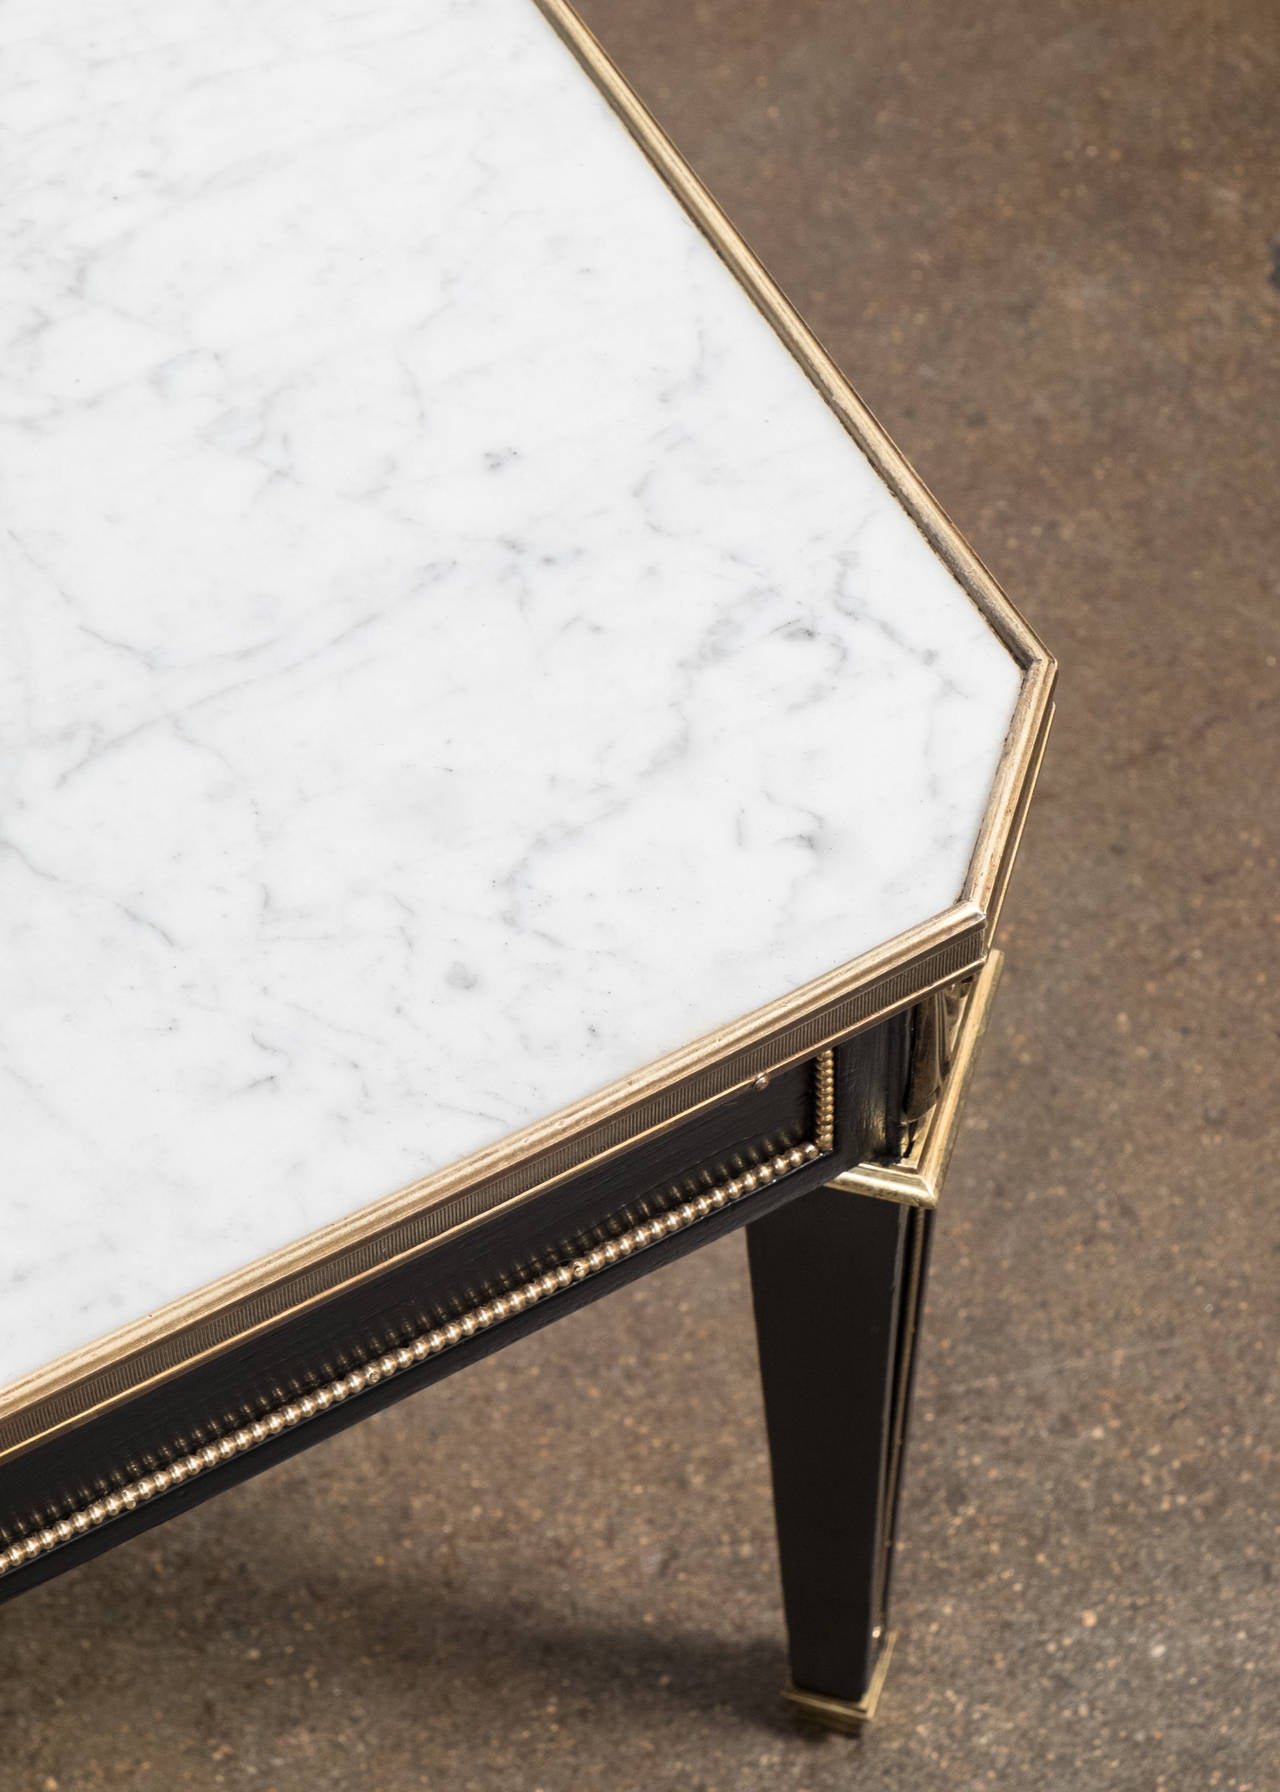 Early 20th Century French Directoire Carrara Marble-Top Coffee Table